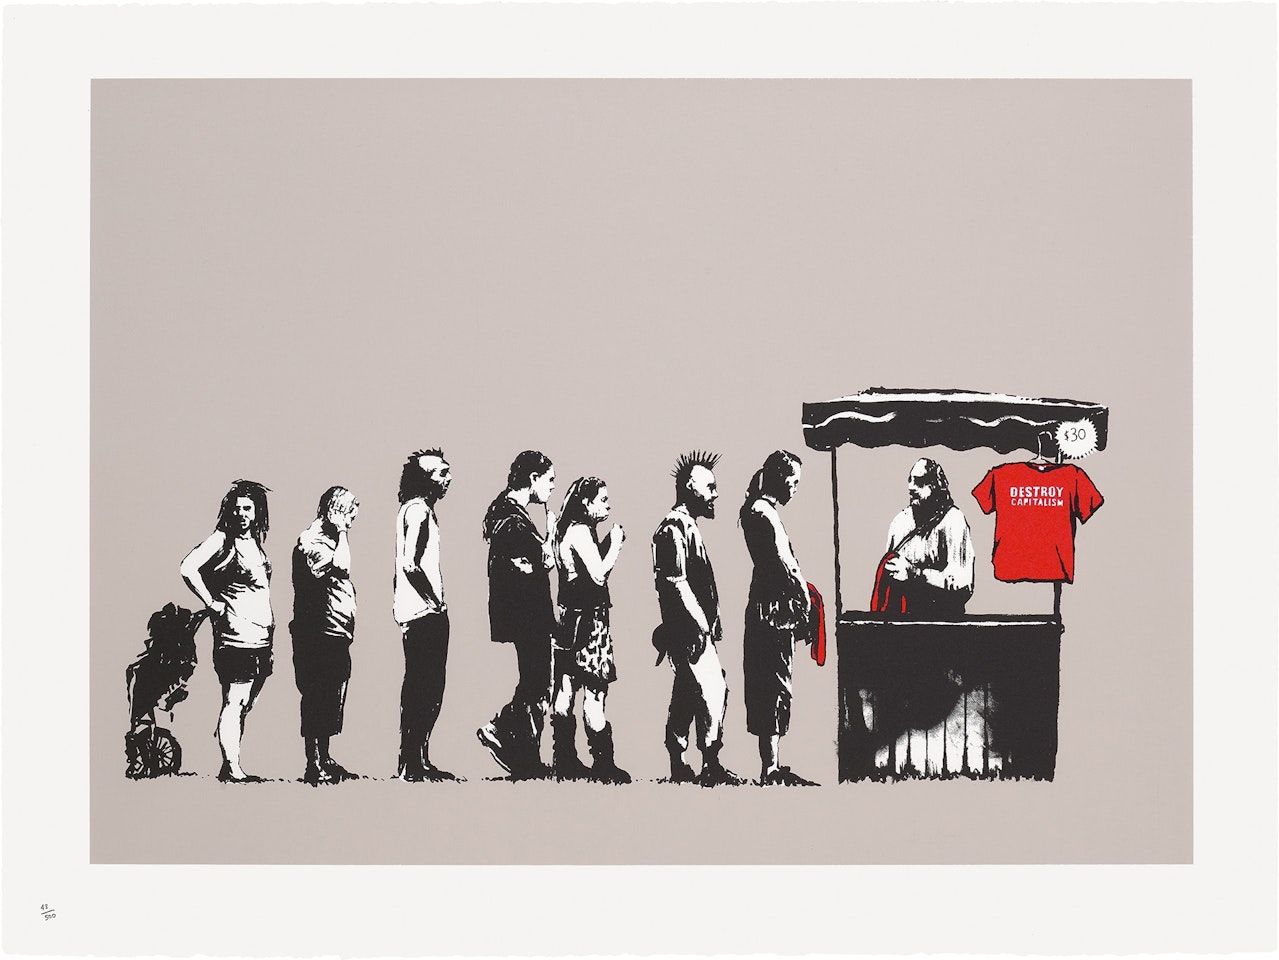 Festival (Destroy Capitalism), from Barely Legal by Banksy